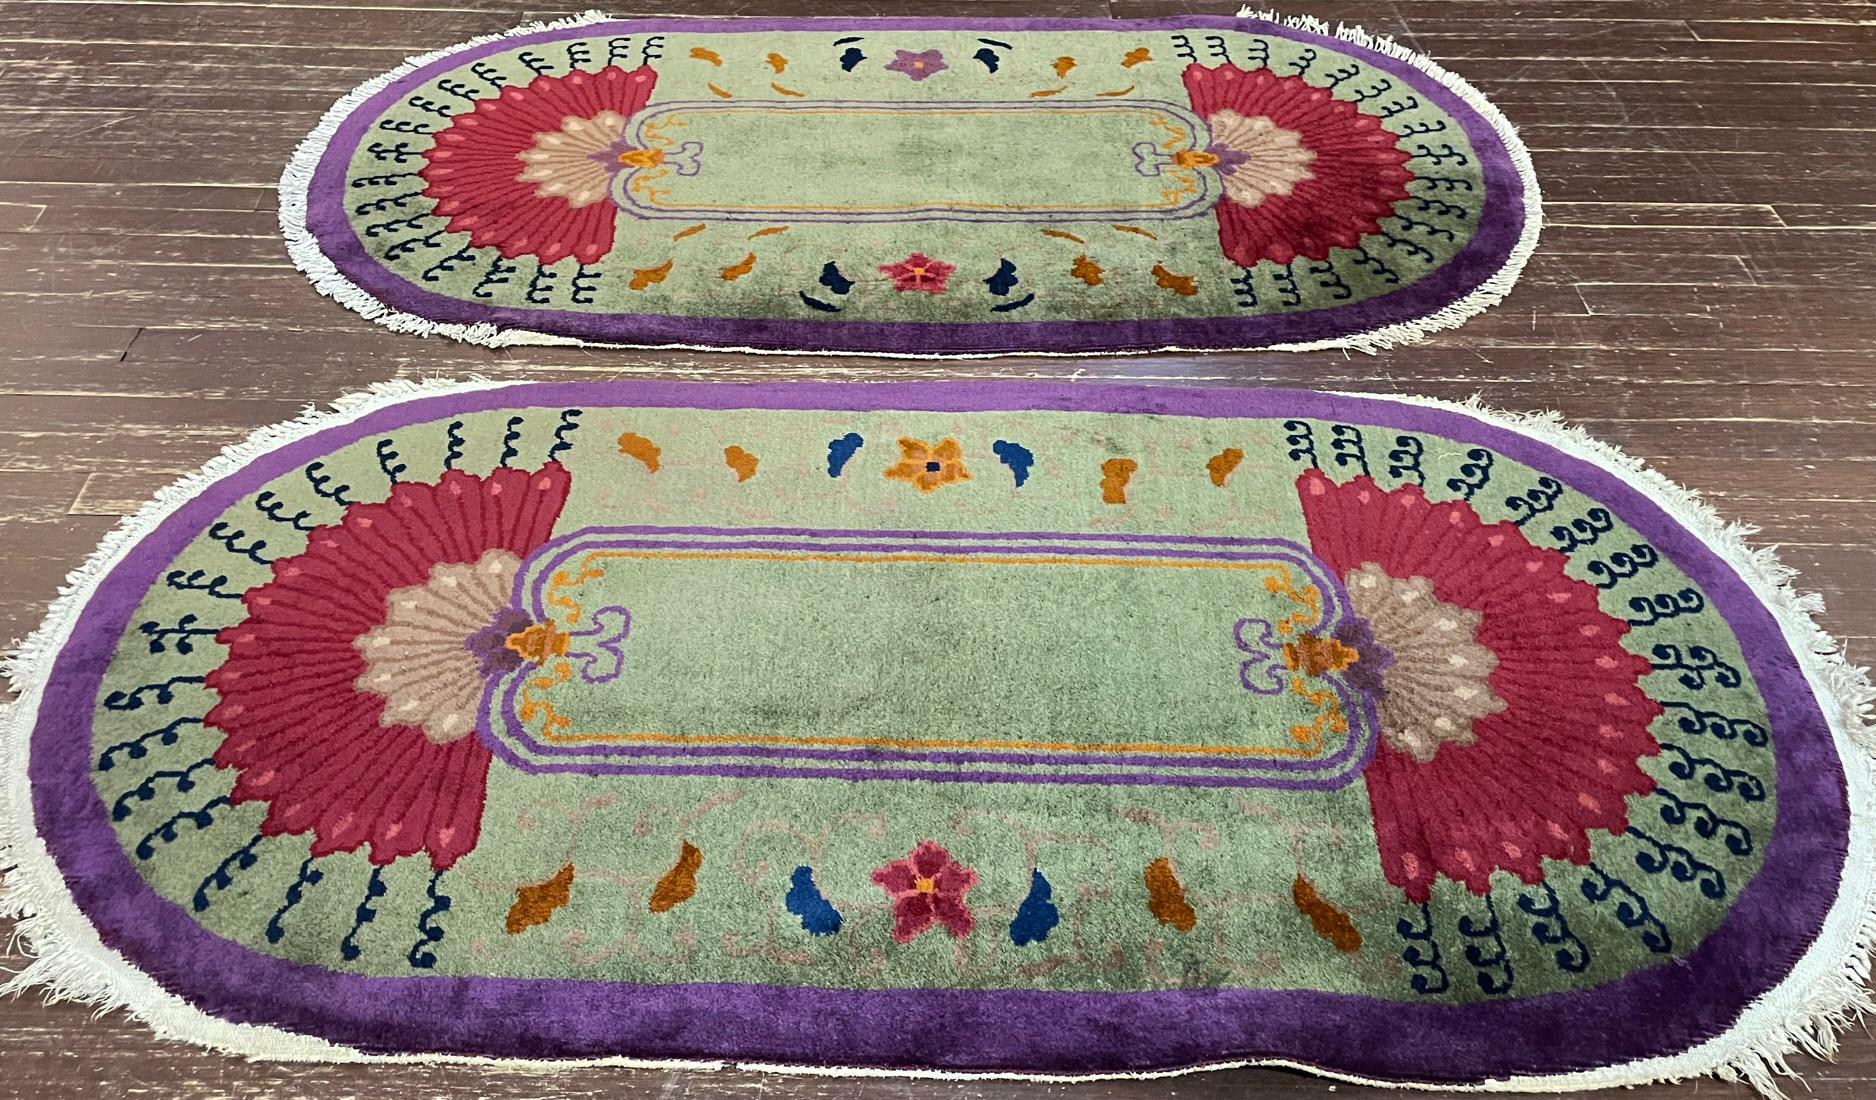 Pair of Oval Shape Antique Art Deco Chinese Rugs, Each, c-1920 In Excellent Condition For Sale In Evanston, IL